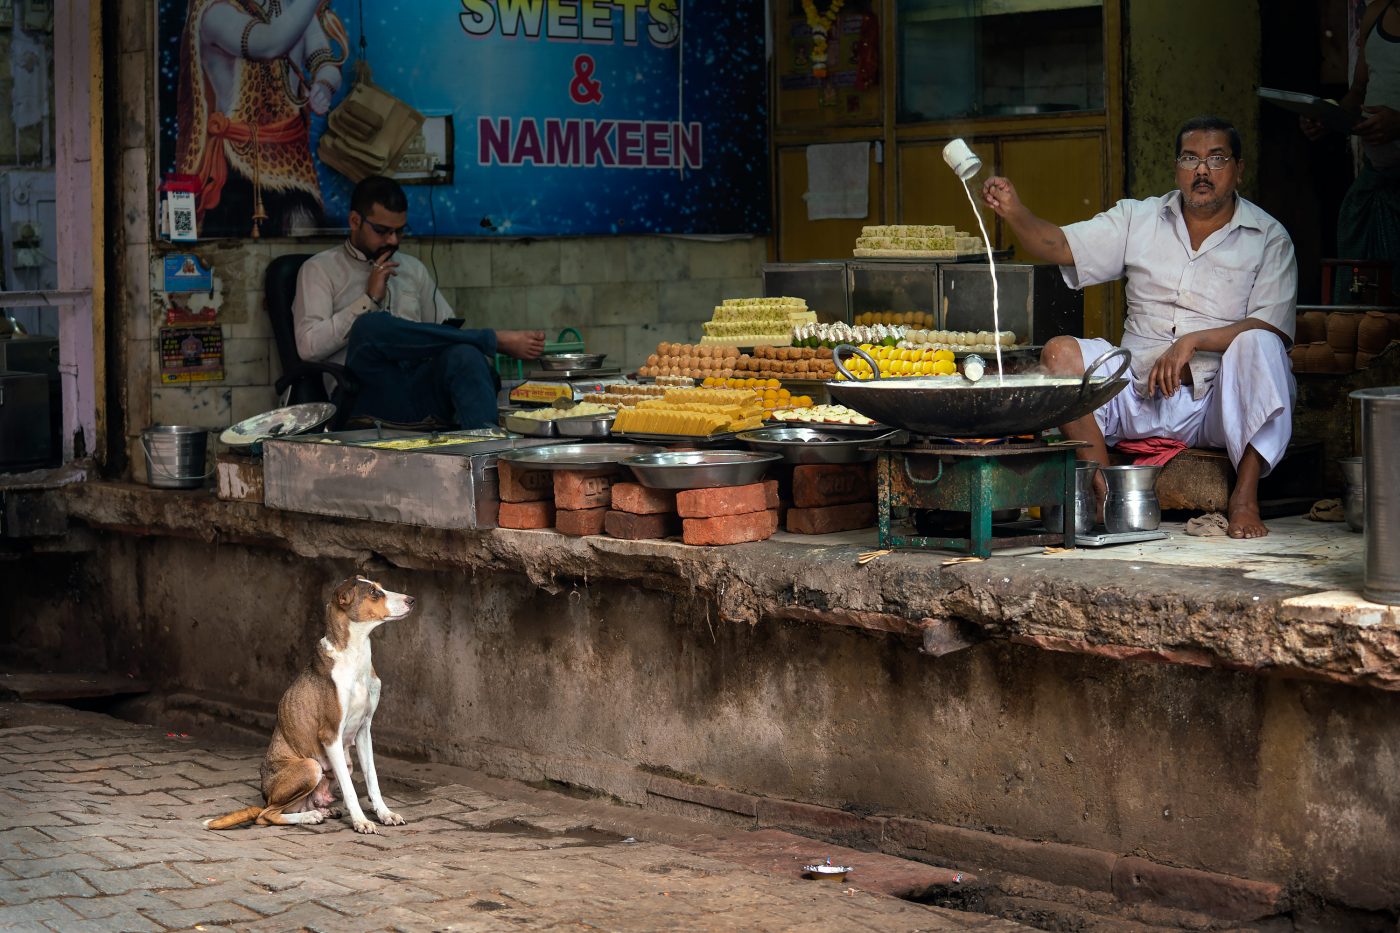 A dog stares longingly at a man pouring sweet milk